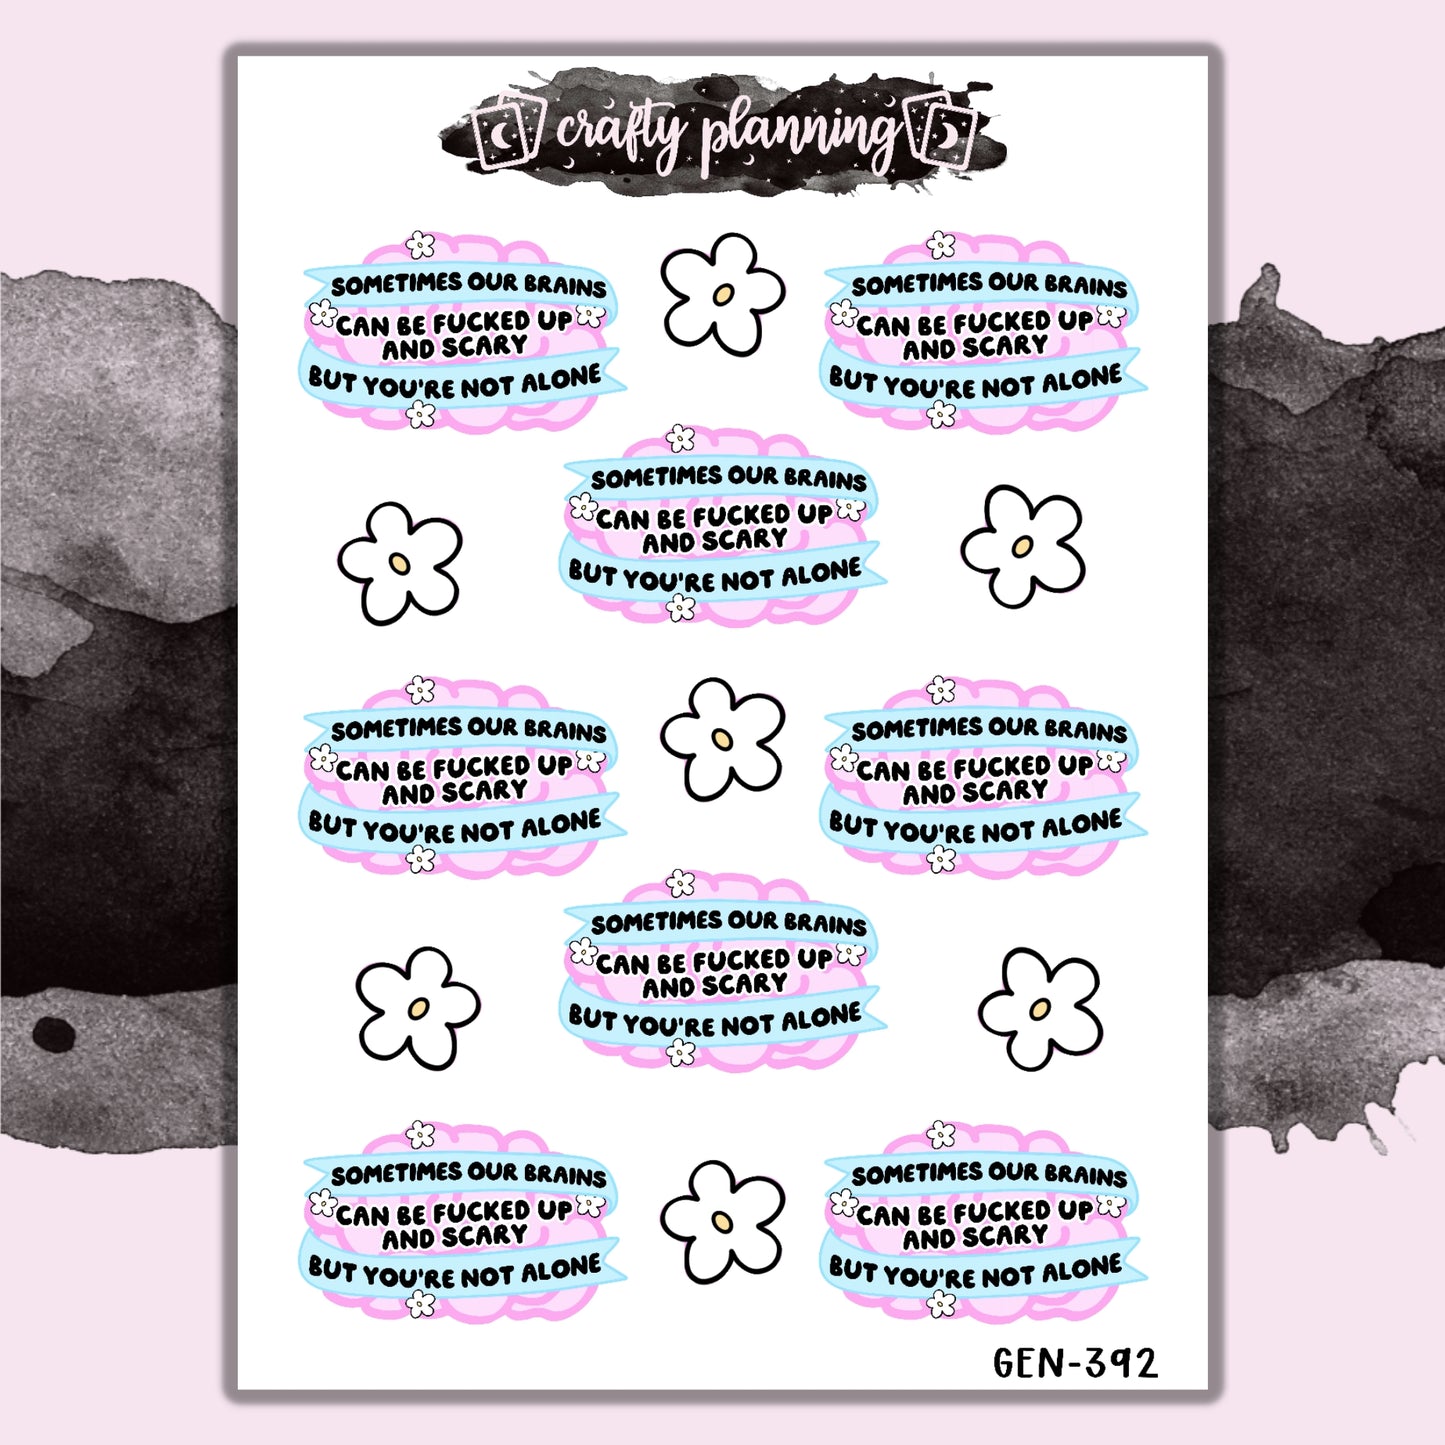 Sometimes Our Brains Can Be F*cked Up & Scary But You Are Not Alone - Mini Sticker Sheet